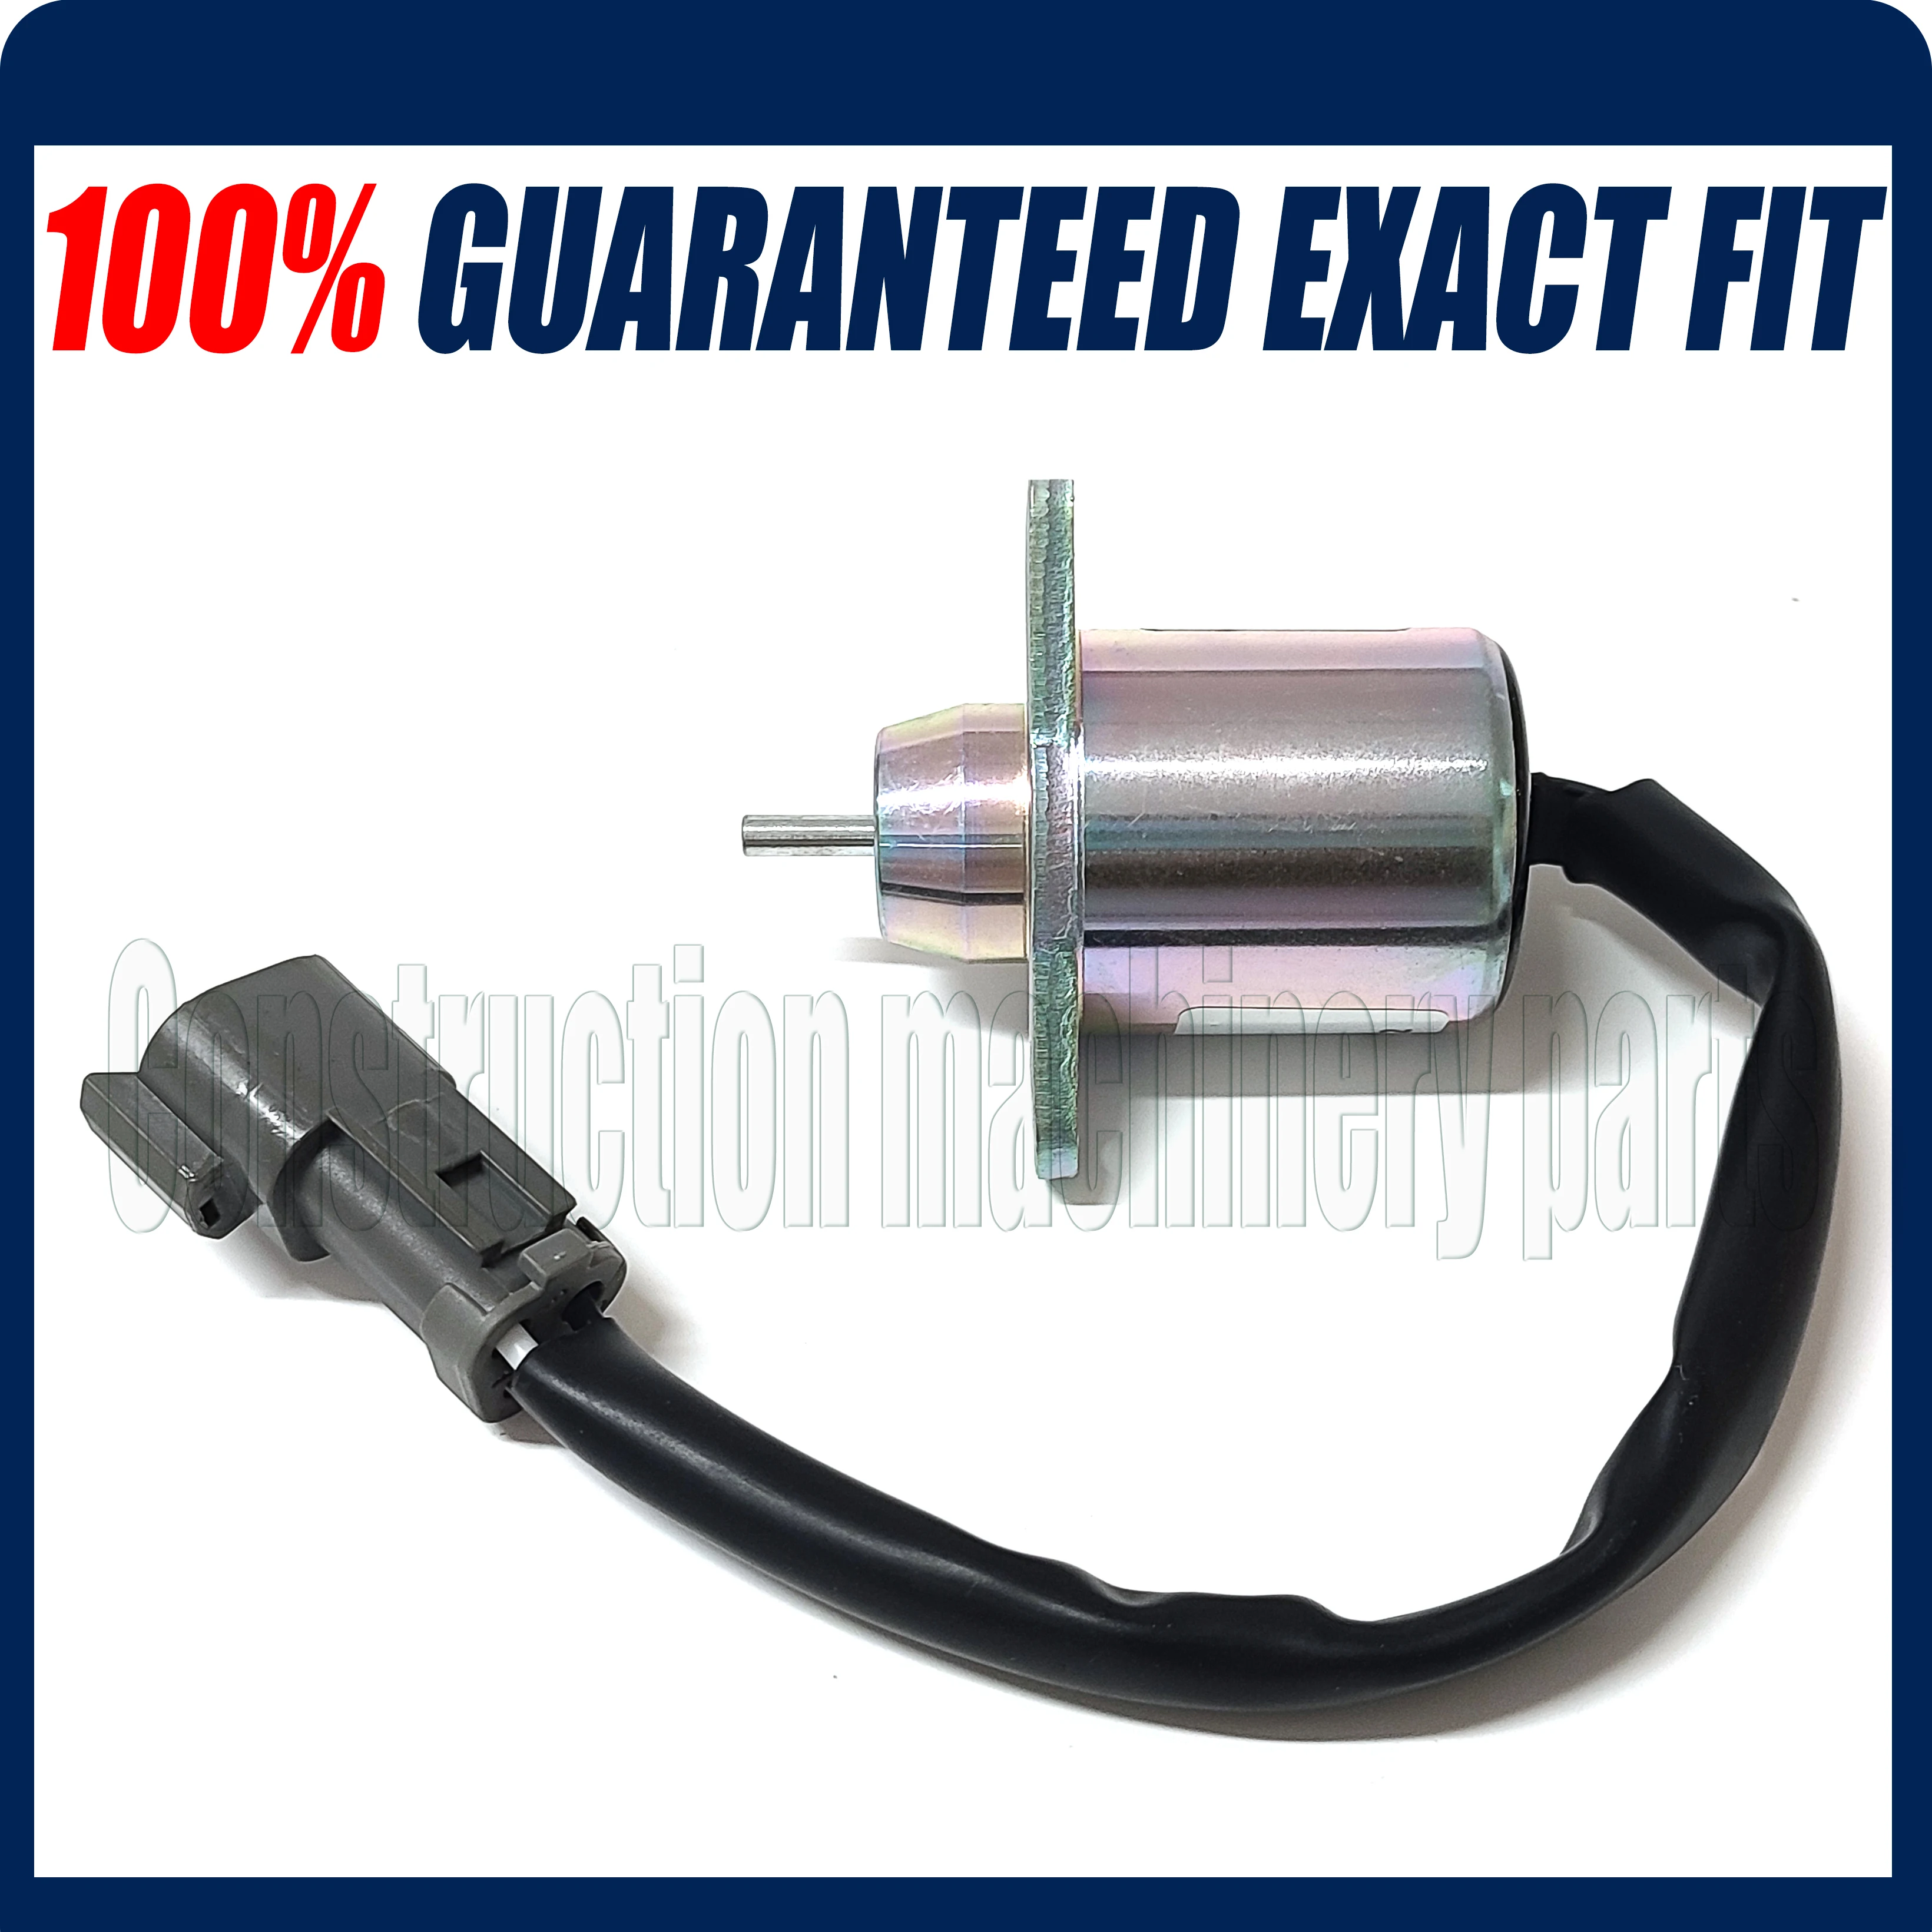 Homyl Fuel Shut Off Solenoid Replace for Engine Thermo King 41-6383 